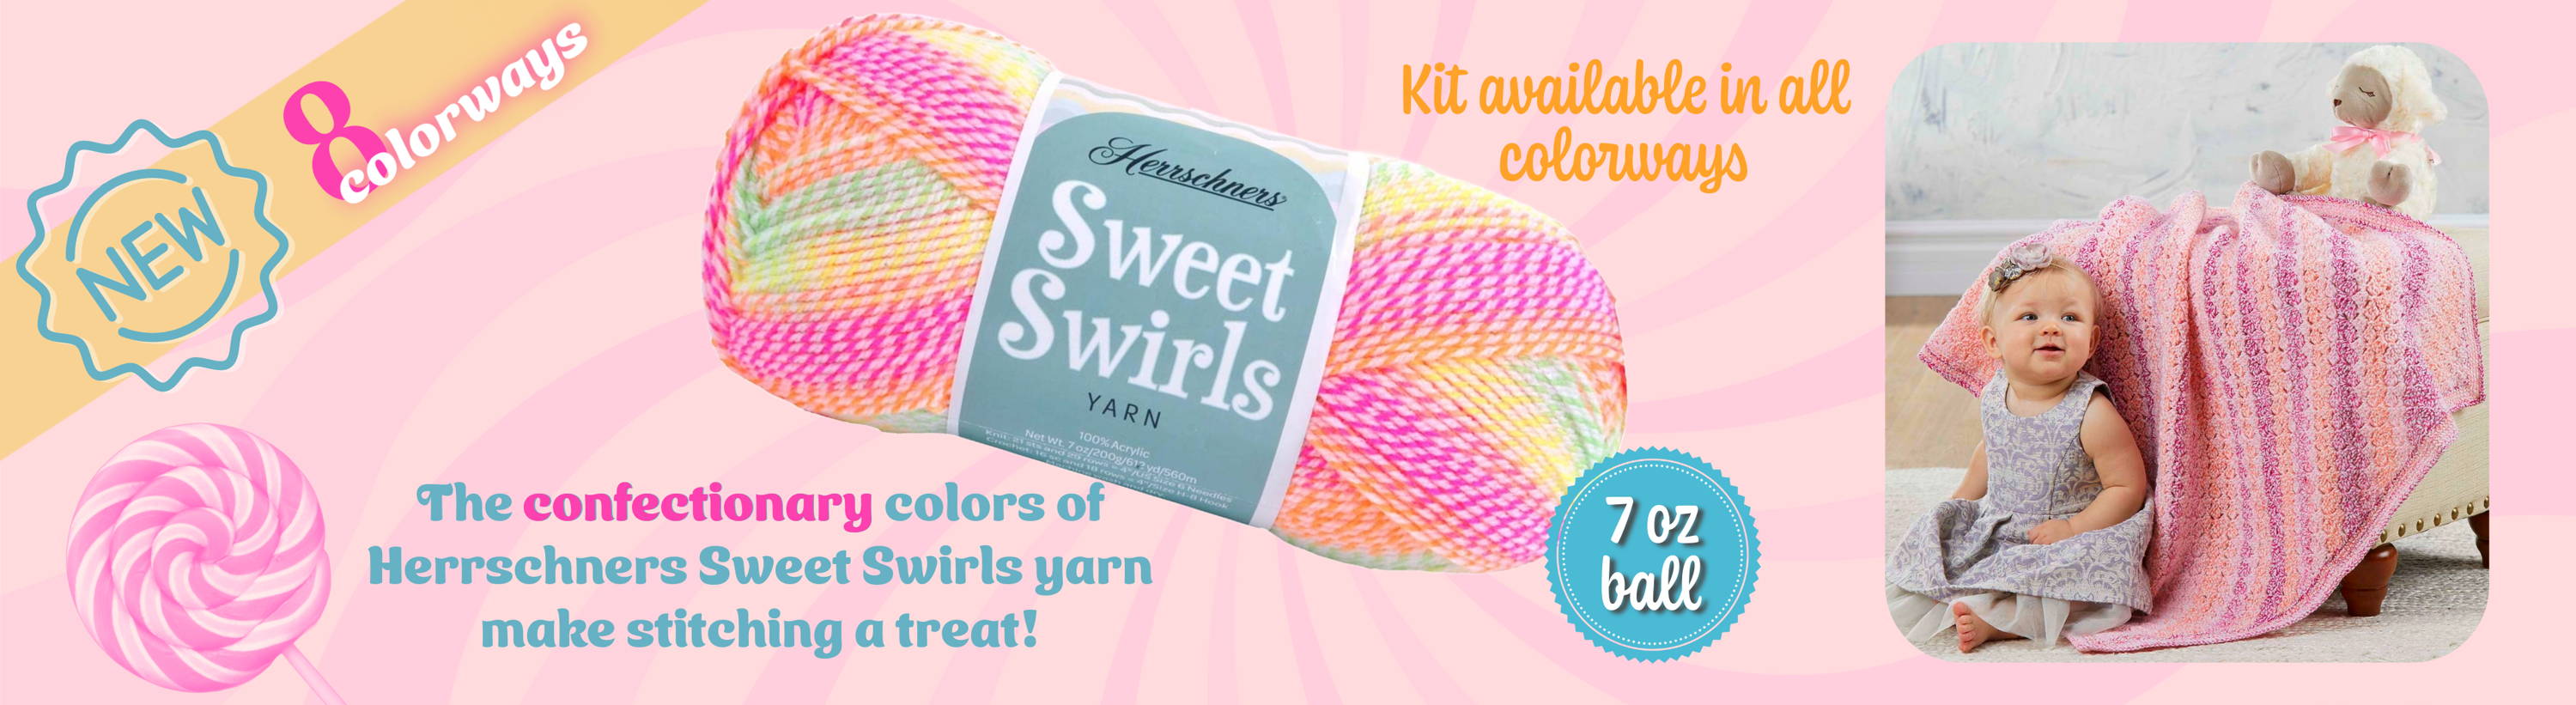 Herrschners Sweet Swirls Yarn (7oz). 8 color options. Kit available. Image: Yarn ball & knitted baby blanket.